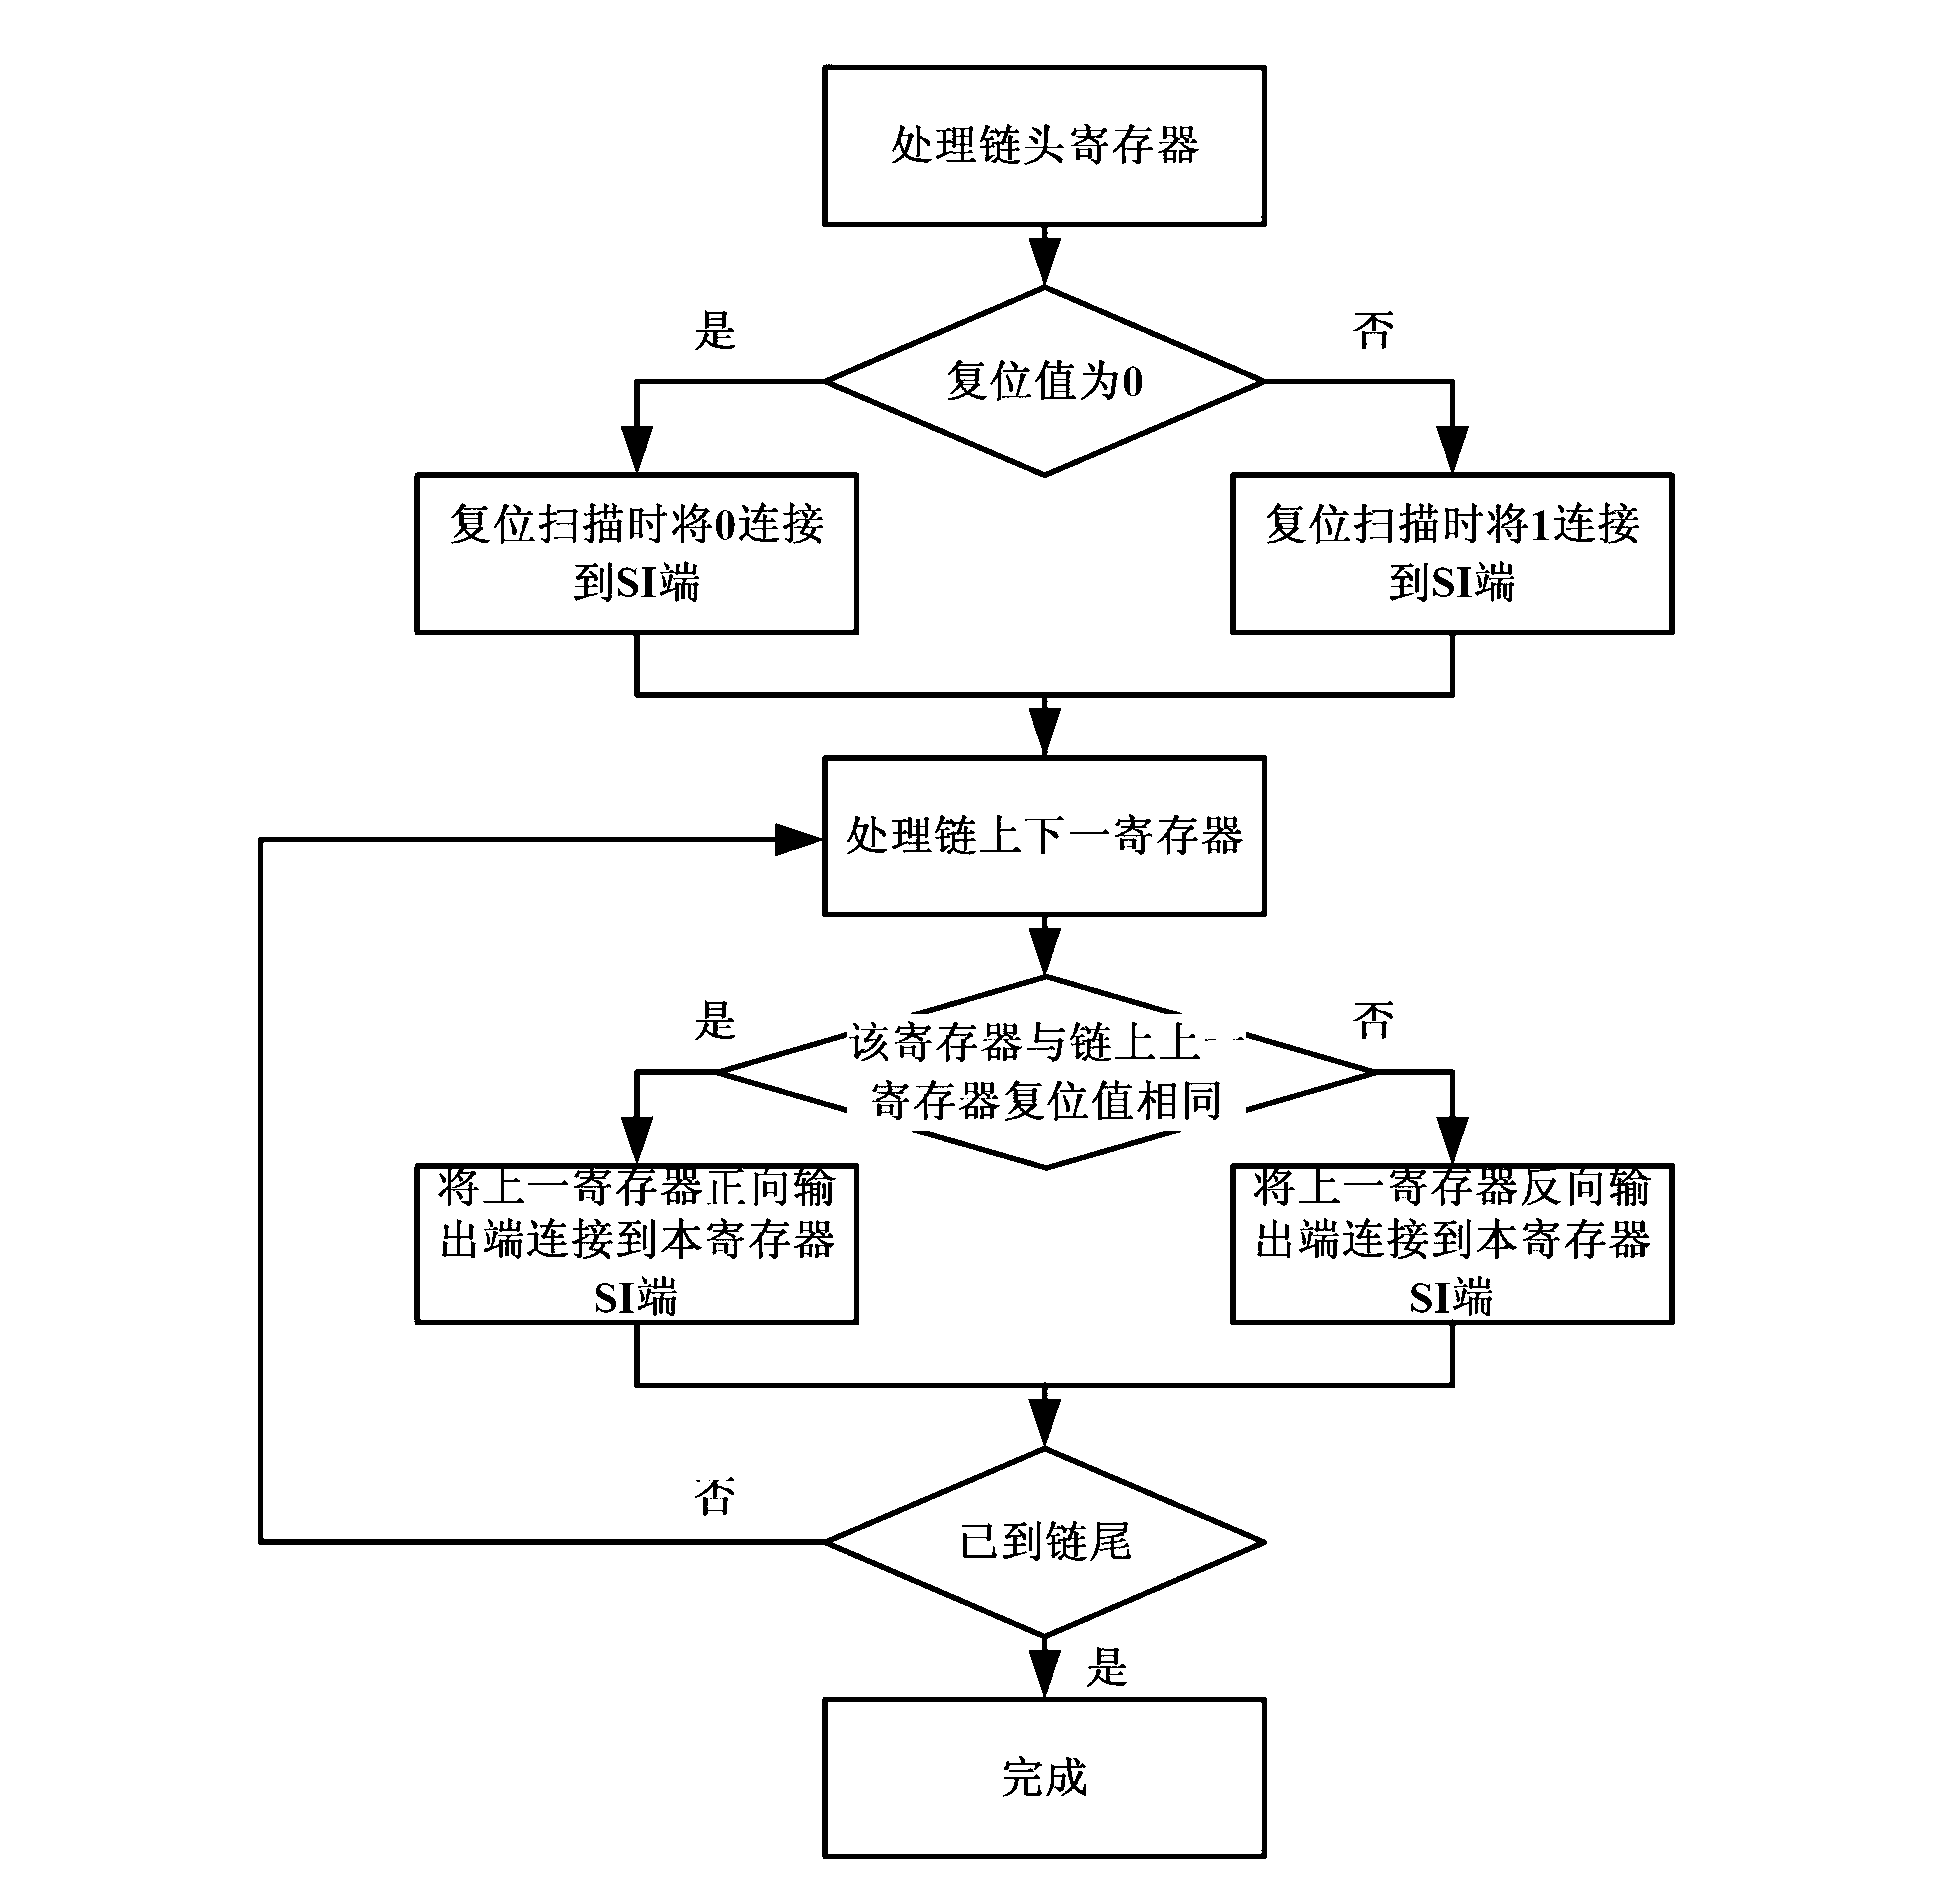 Reset method of internal memory of chip based on scan chain